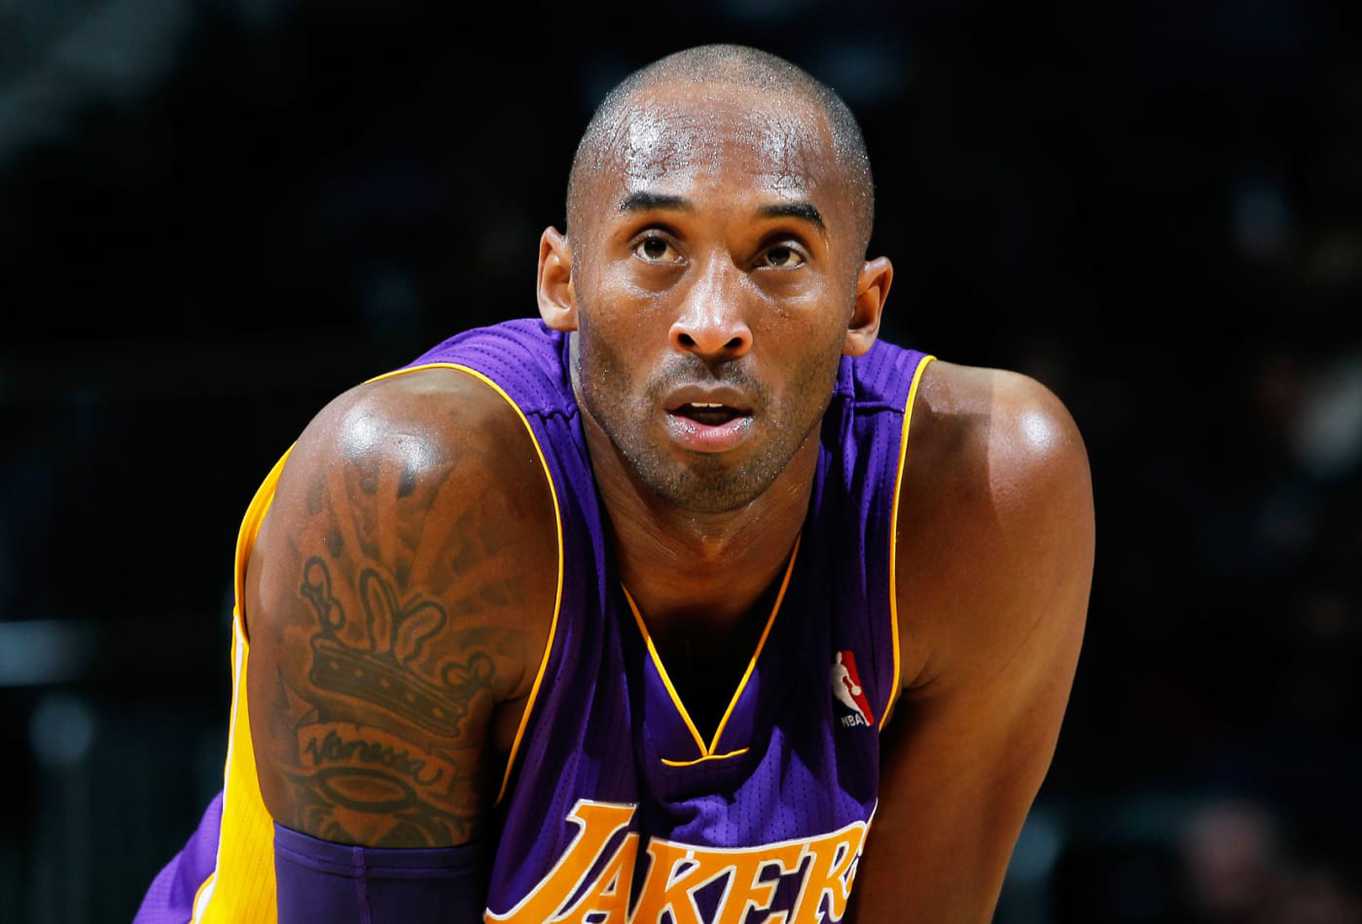 Kobe Bryant is one of the top earning dead celebrities according to Forbes thanks to his Nike contract